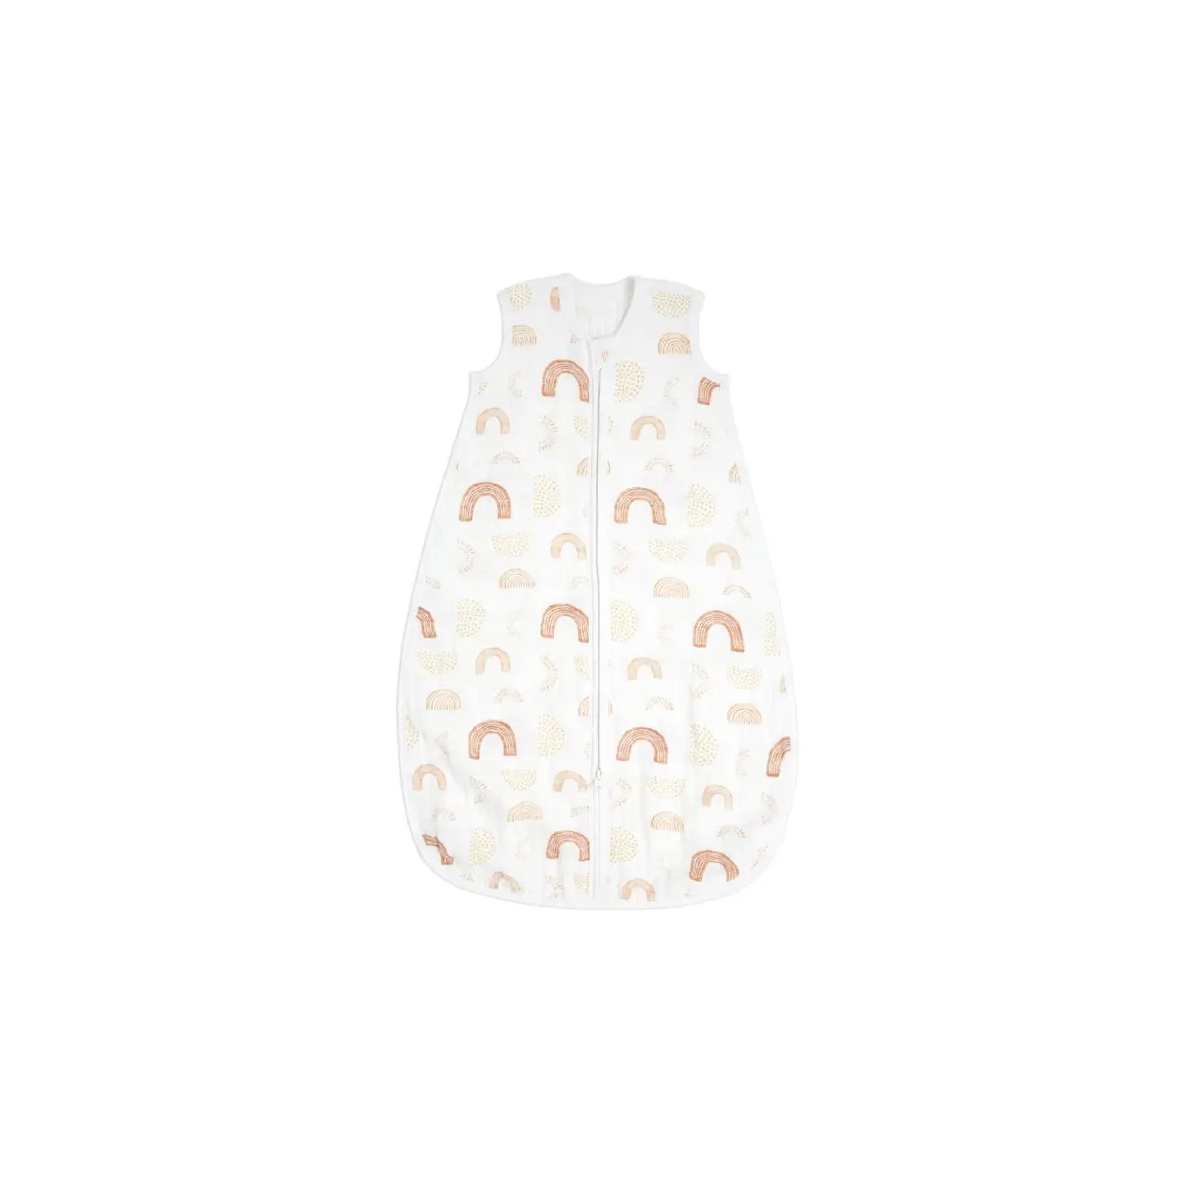 Image of Aden + Anais Light Sleeping Bag 1.0 TOG Cotton Muslin 6-18 Months - Keep Rising/Oh Happy Day (23-19-162)